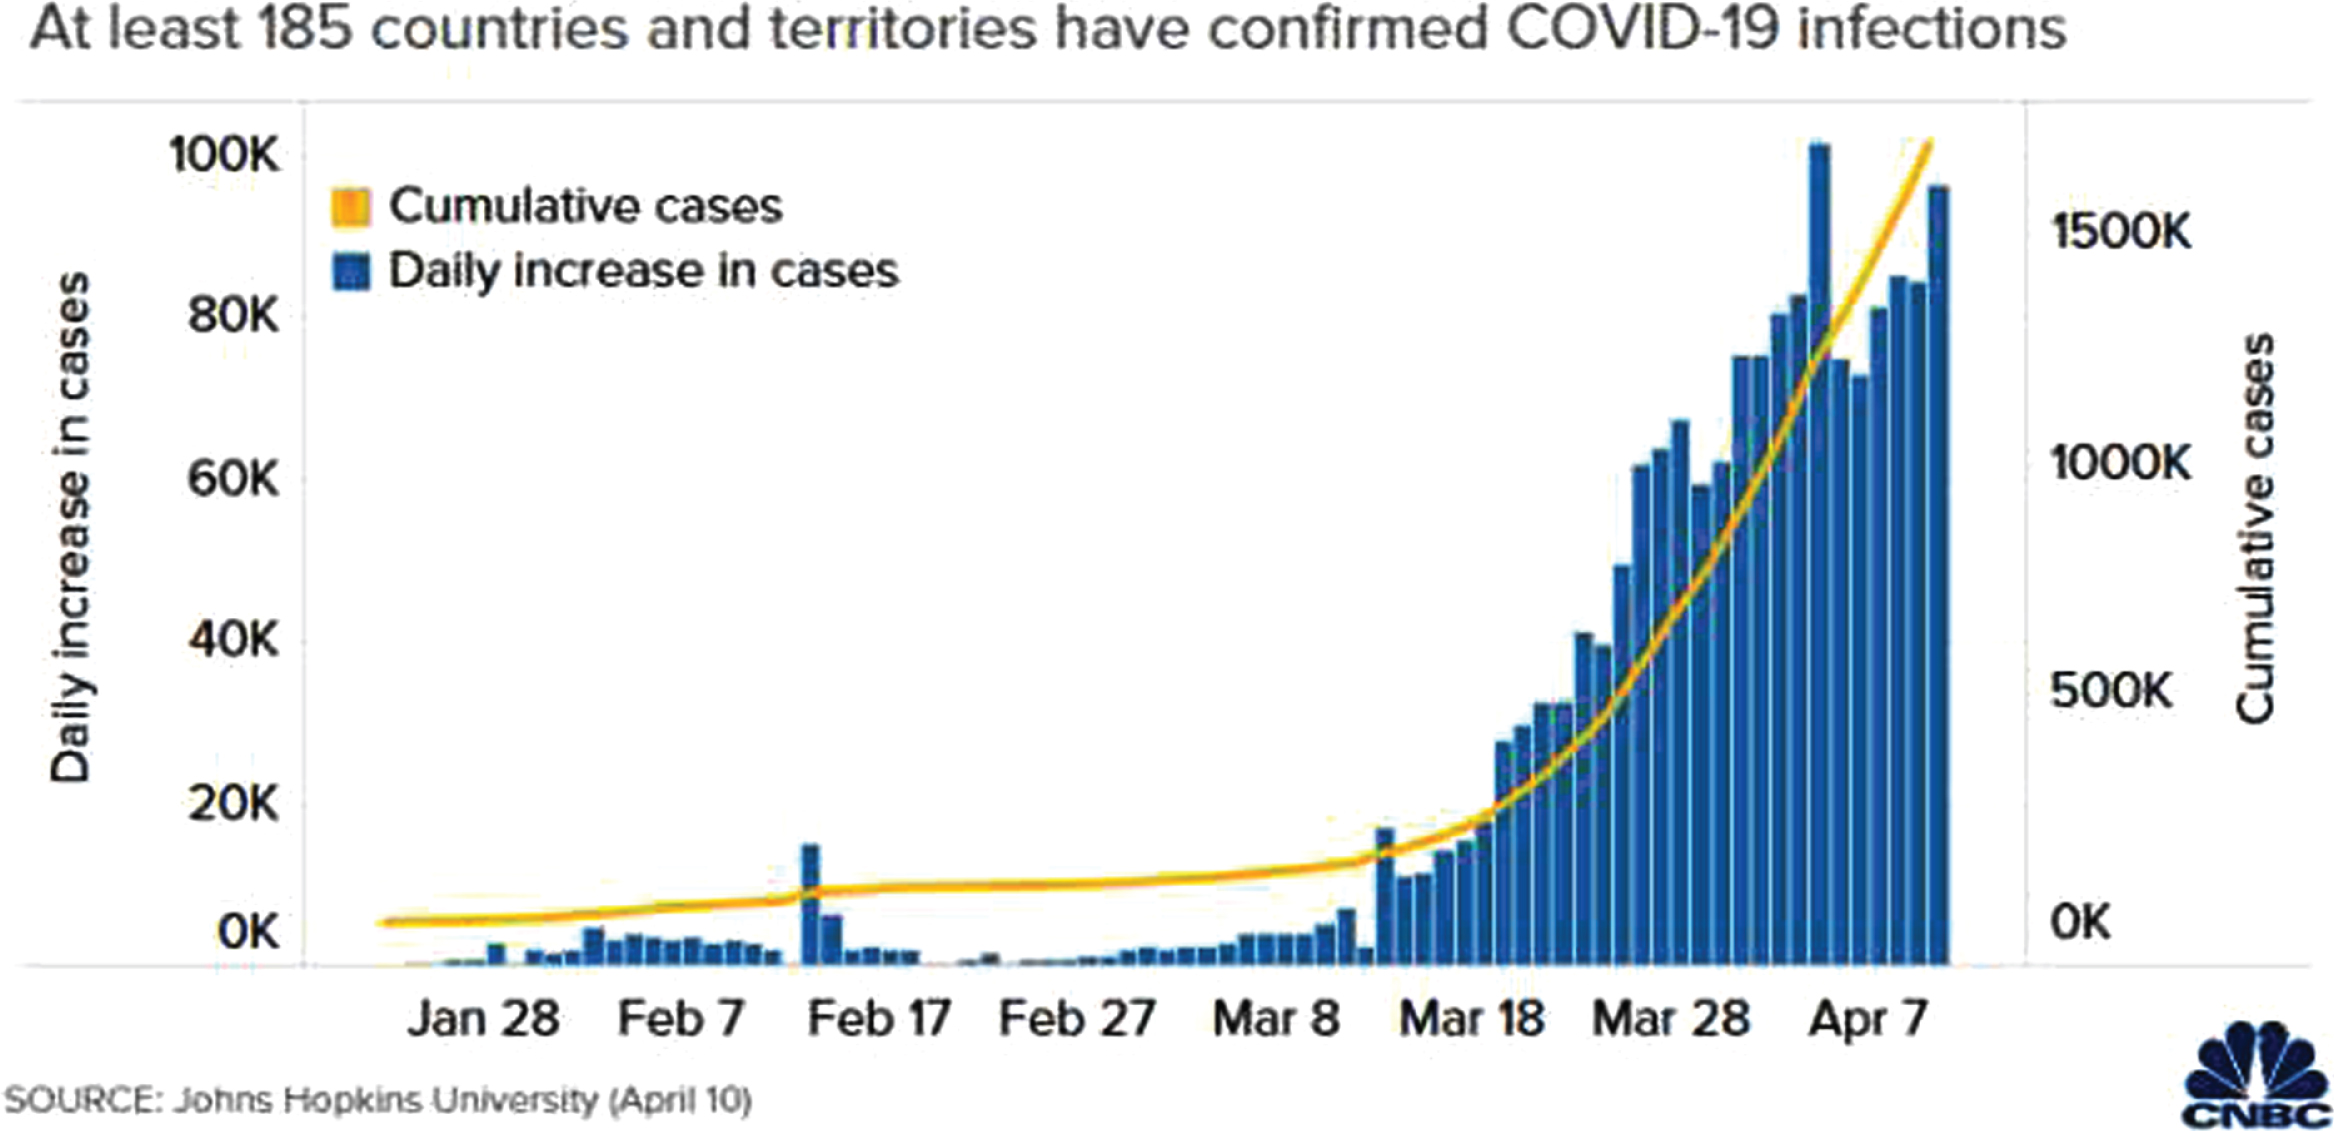 Global increase in reported COVID-19 cases.